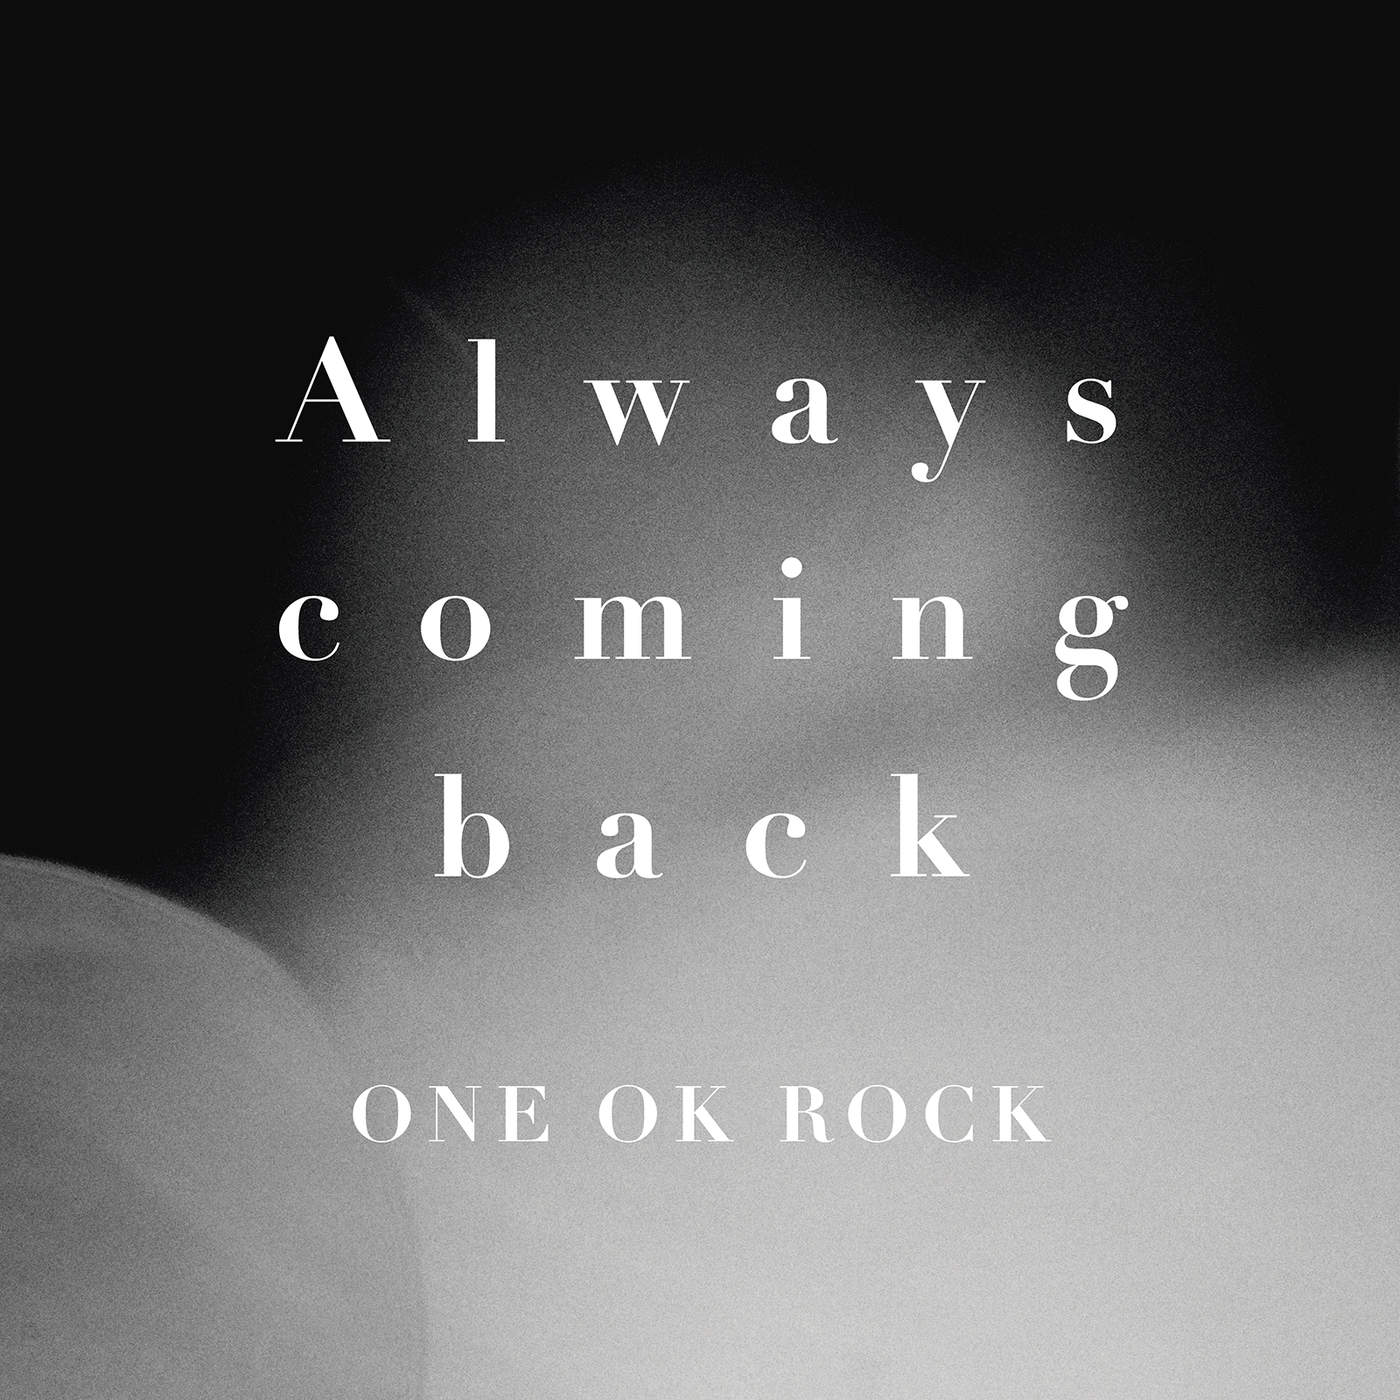 one ok rock full discography download